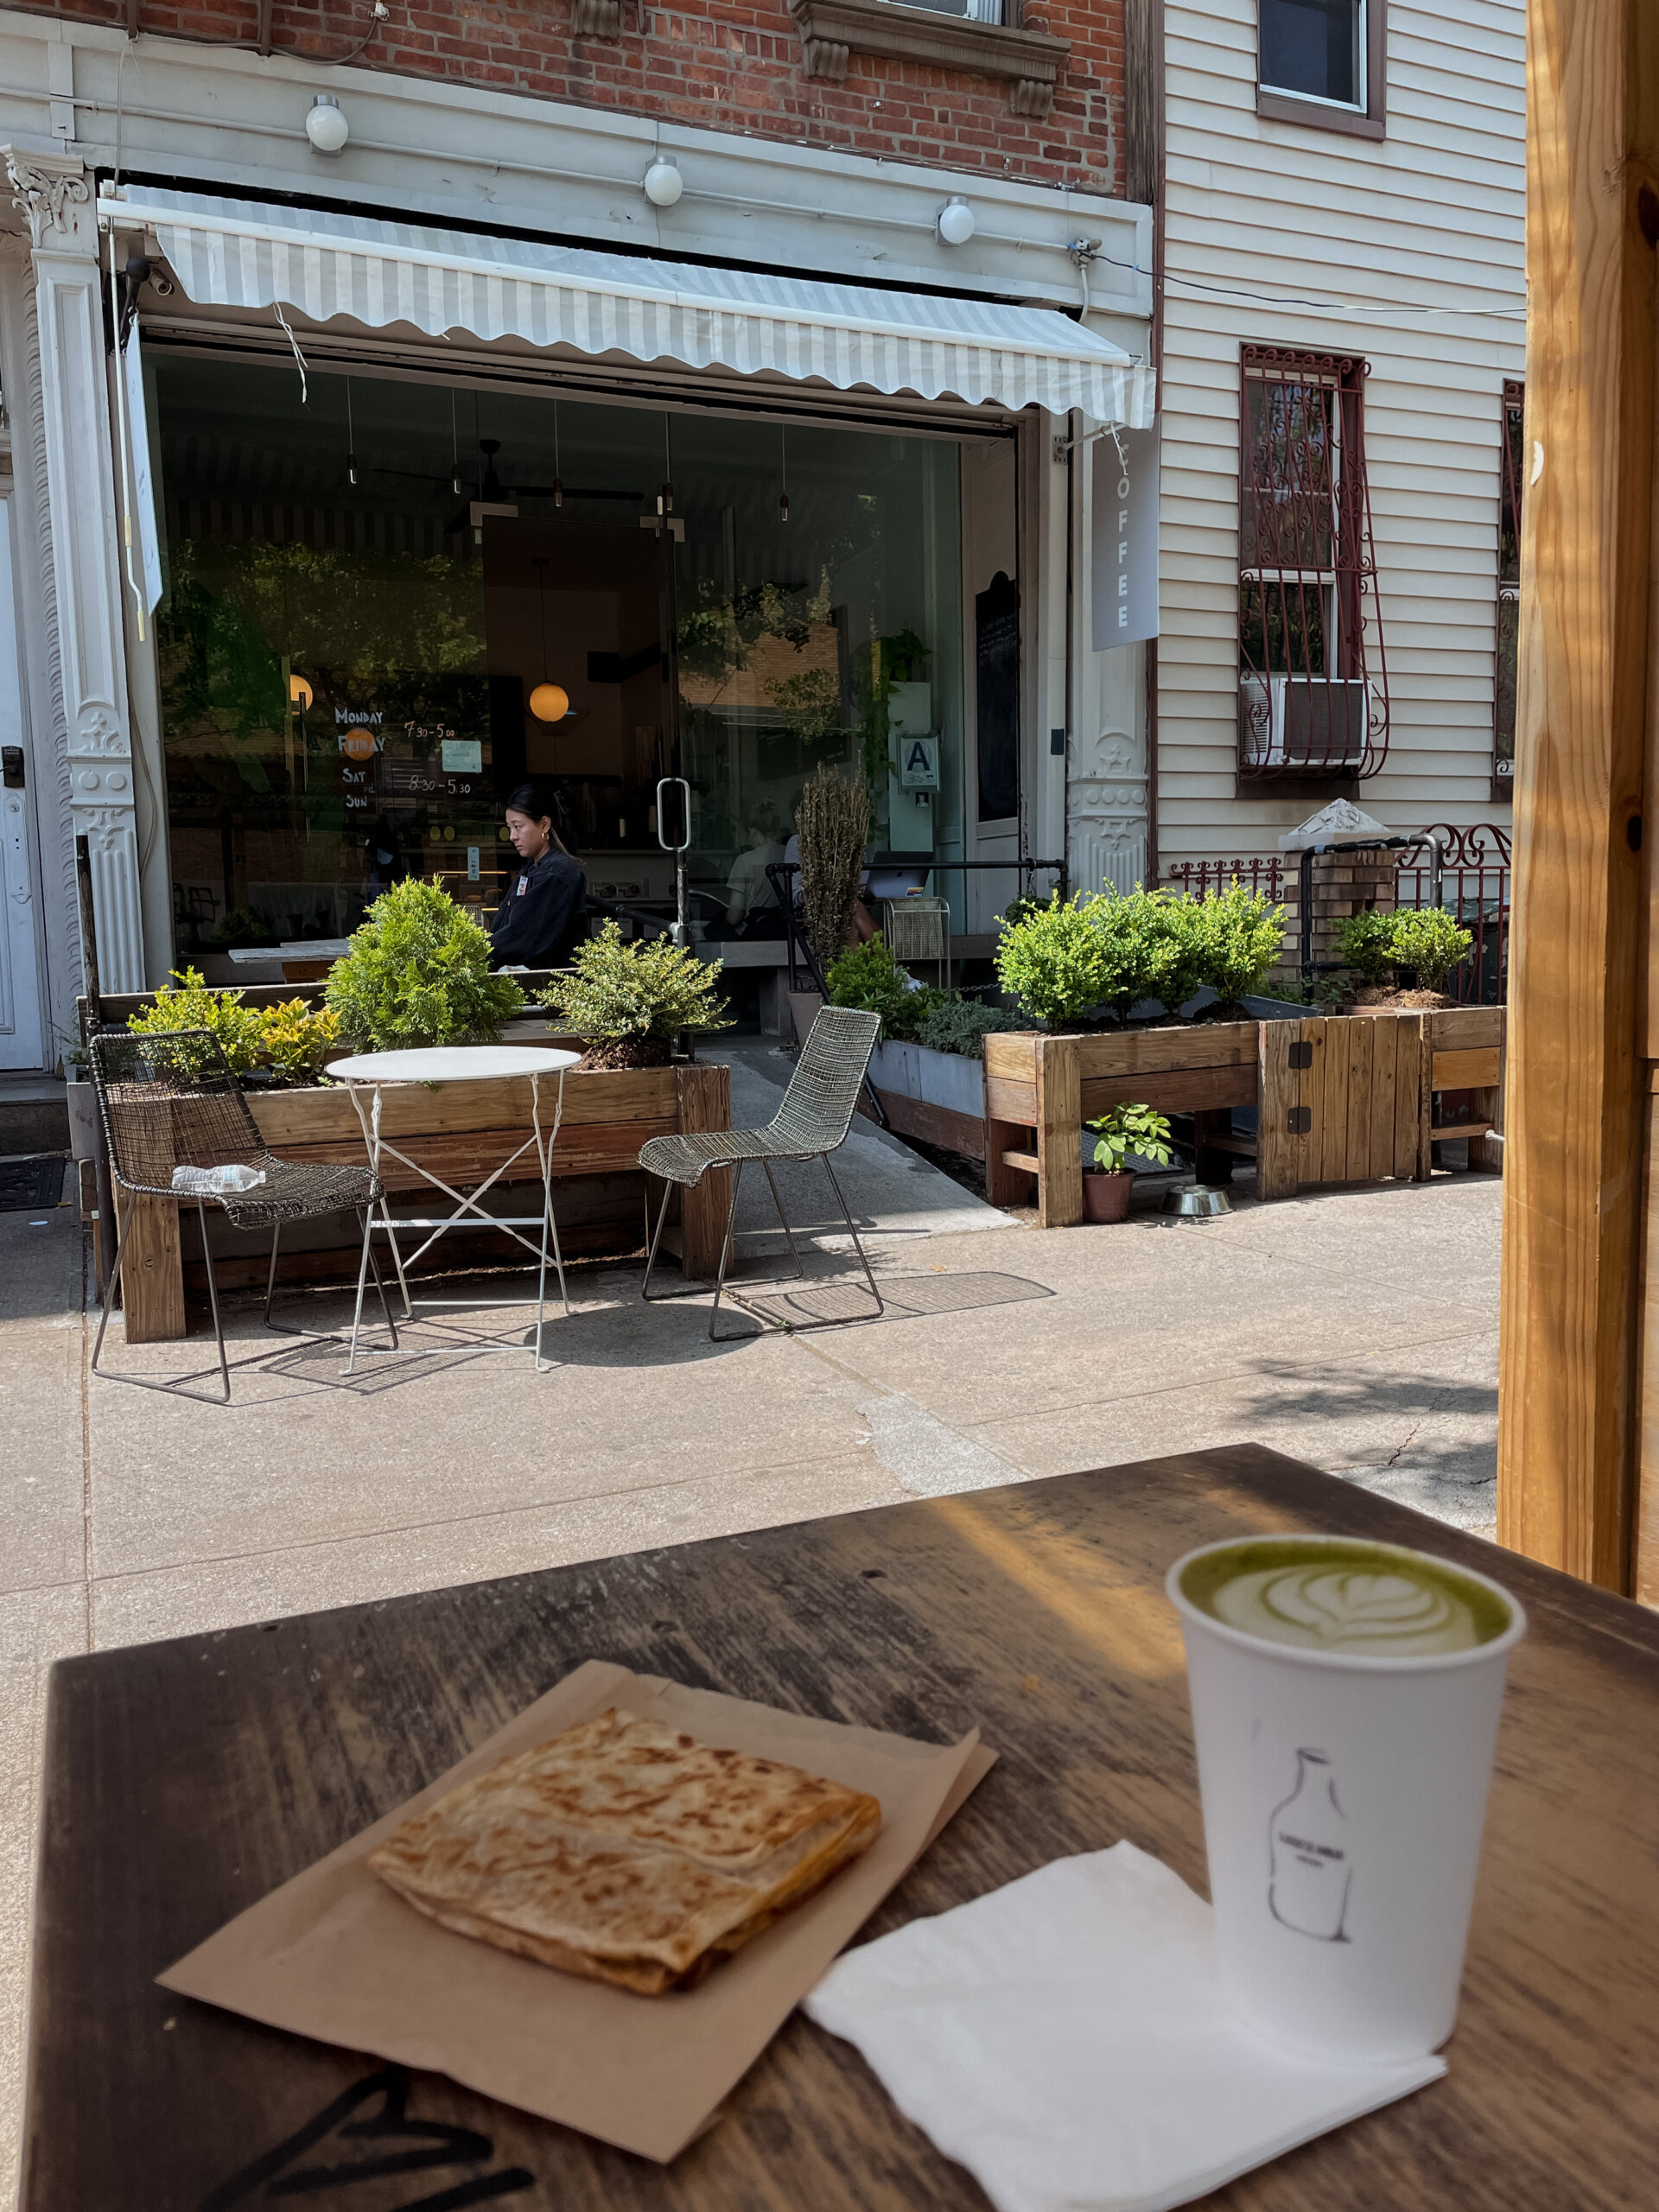 The Best Coffee Shops To Work From In Williamsburg, Brooklyn | aestheticstraveler.com luxury travel & lifestyle blog